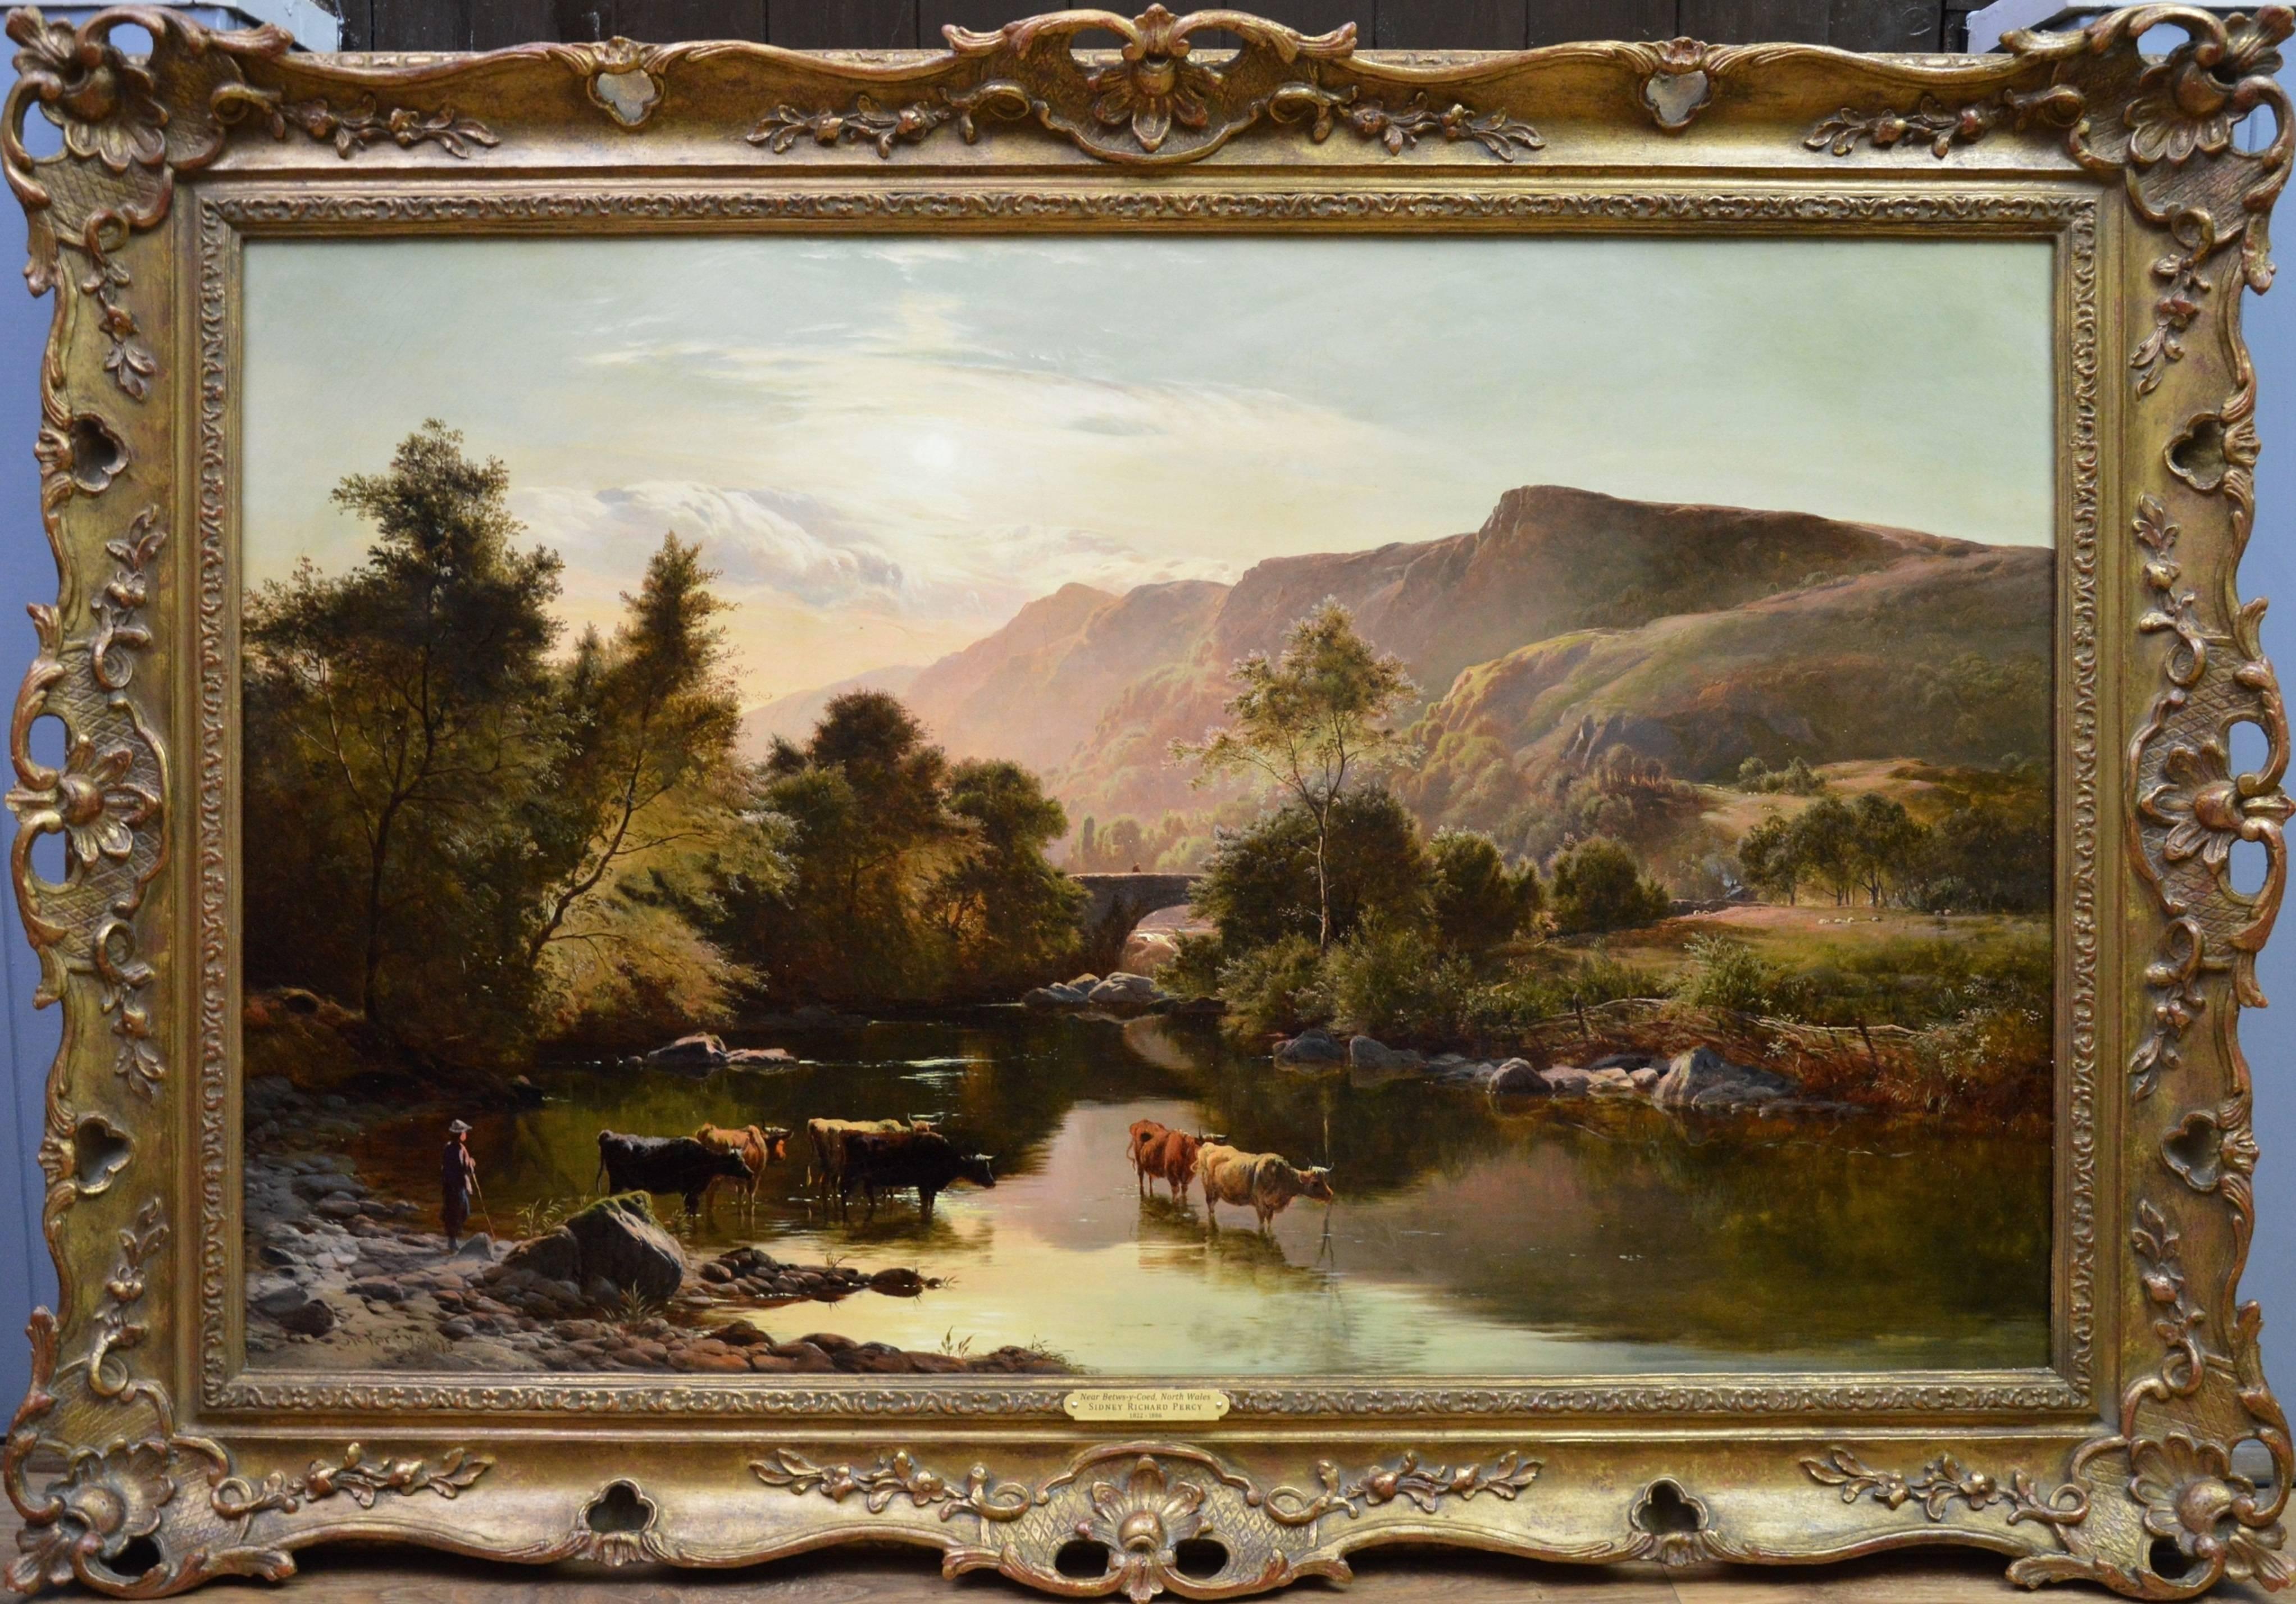 This is a very fine large 19th century oil on canvas depicting cattle watering at the riverside in an extensive mountainous summer landscape ‘Near Betwys-y-Coed, North Wales’ by the important Victorian landscape painter Sidney Richard Percy